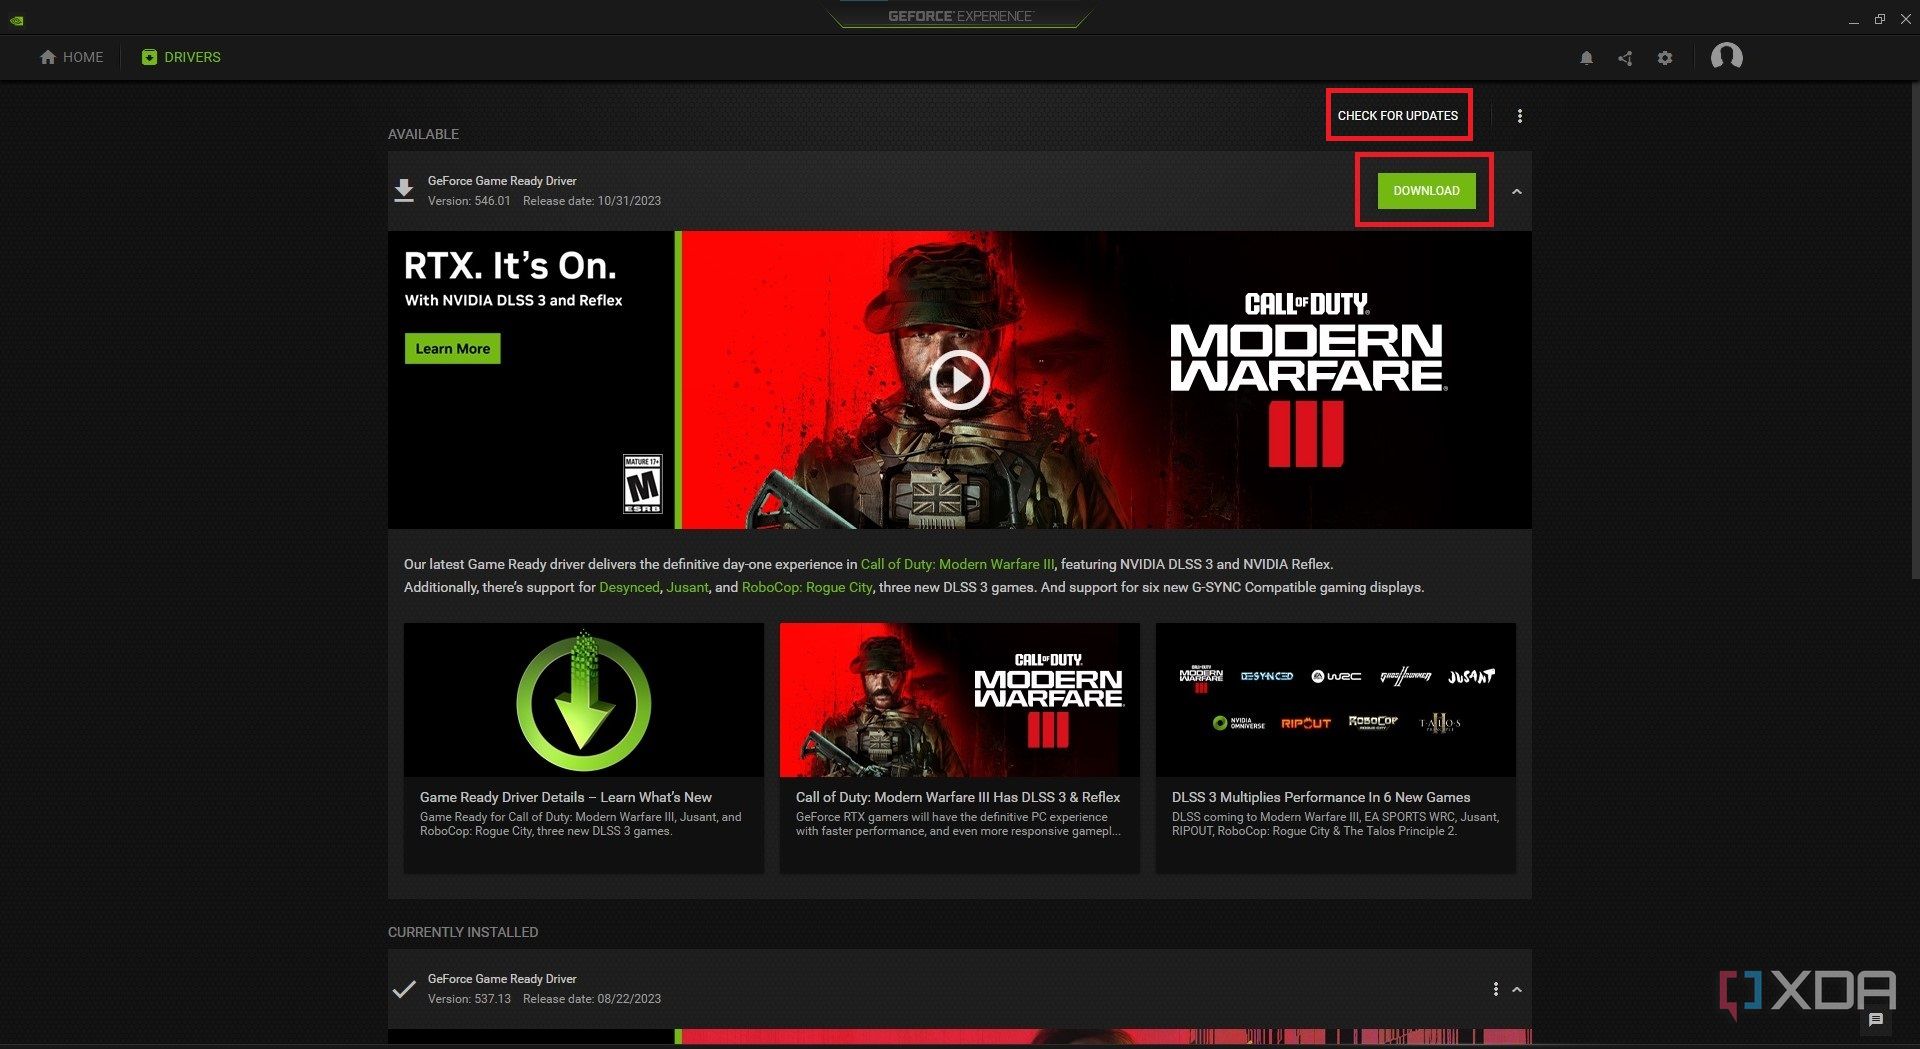 geforce experience drivers section with download button for new update highlighted